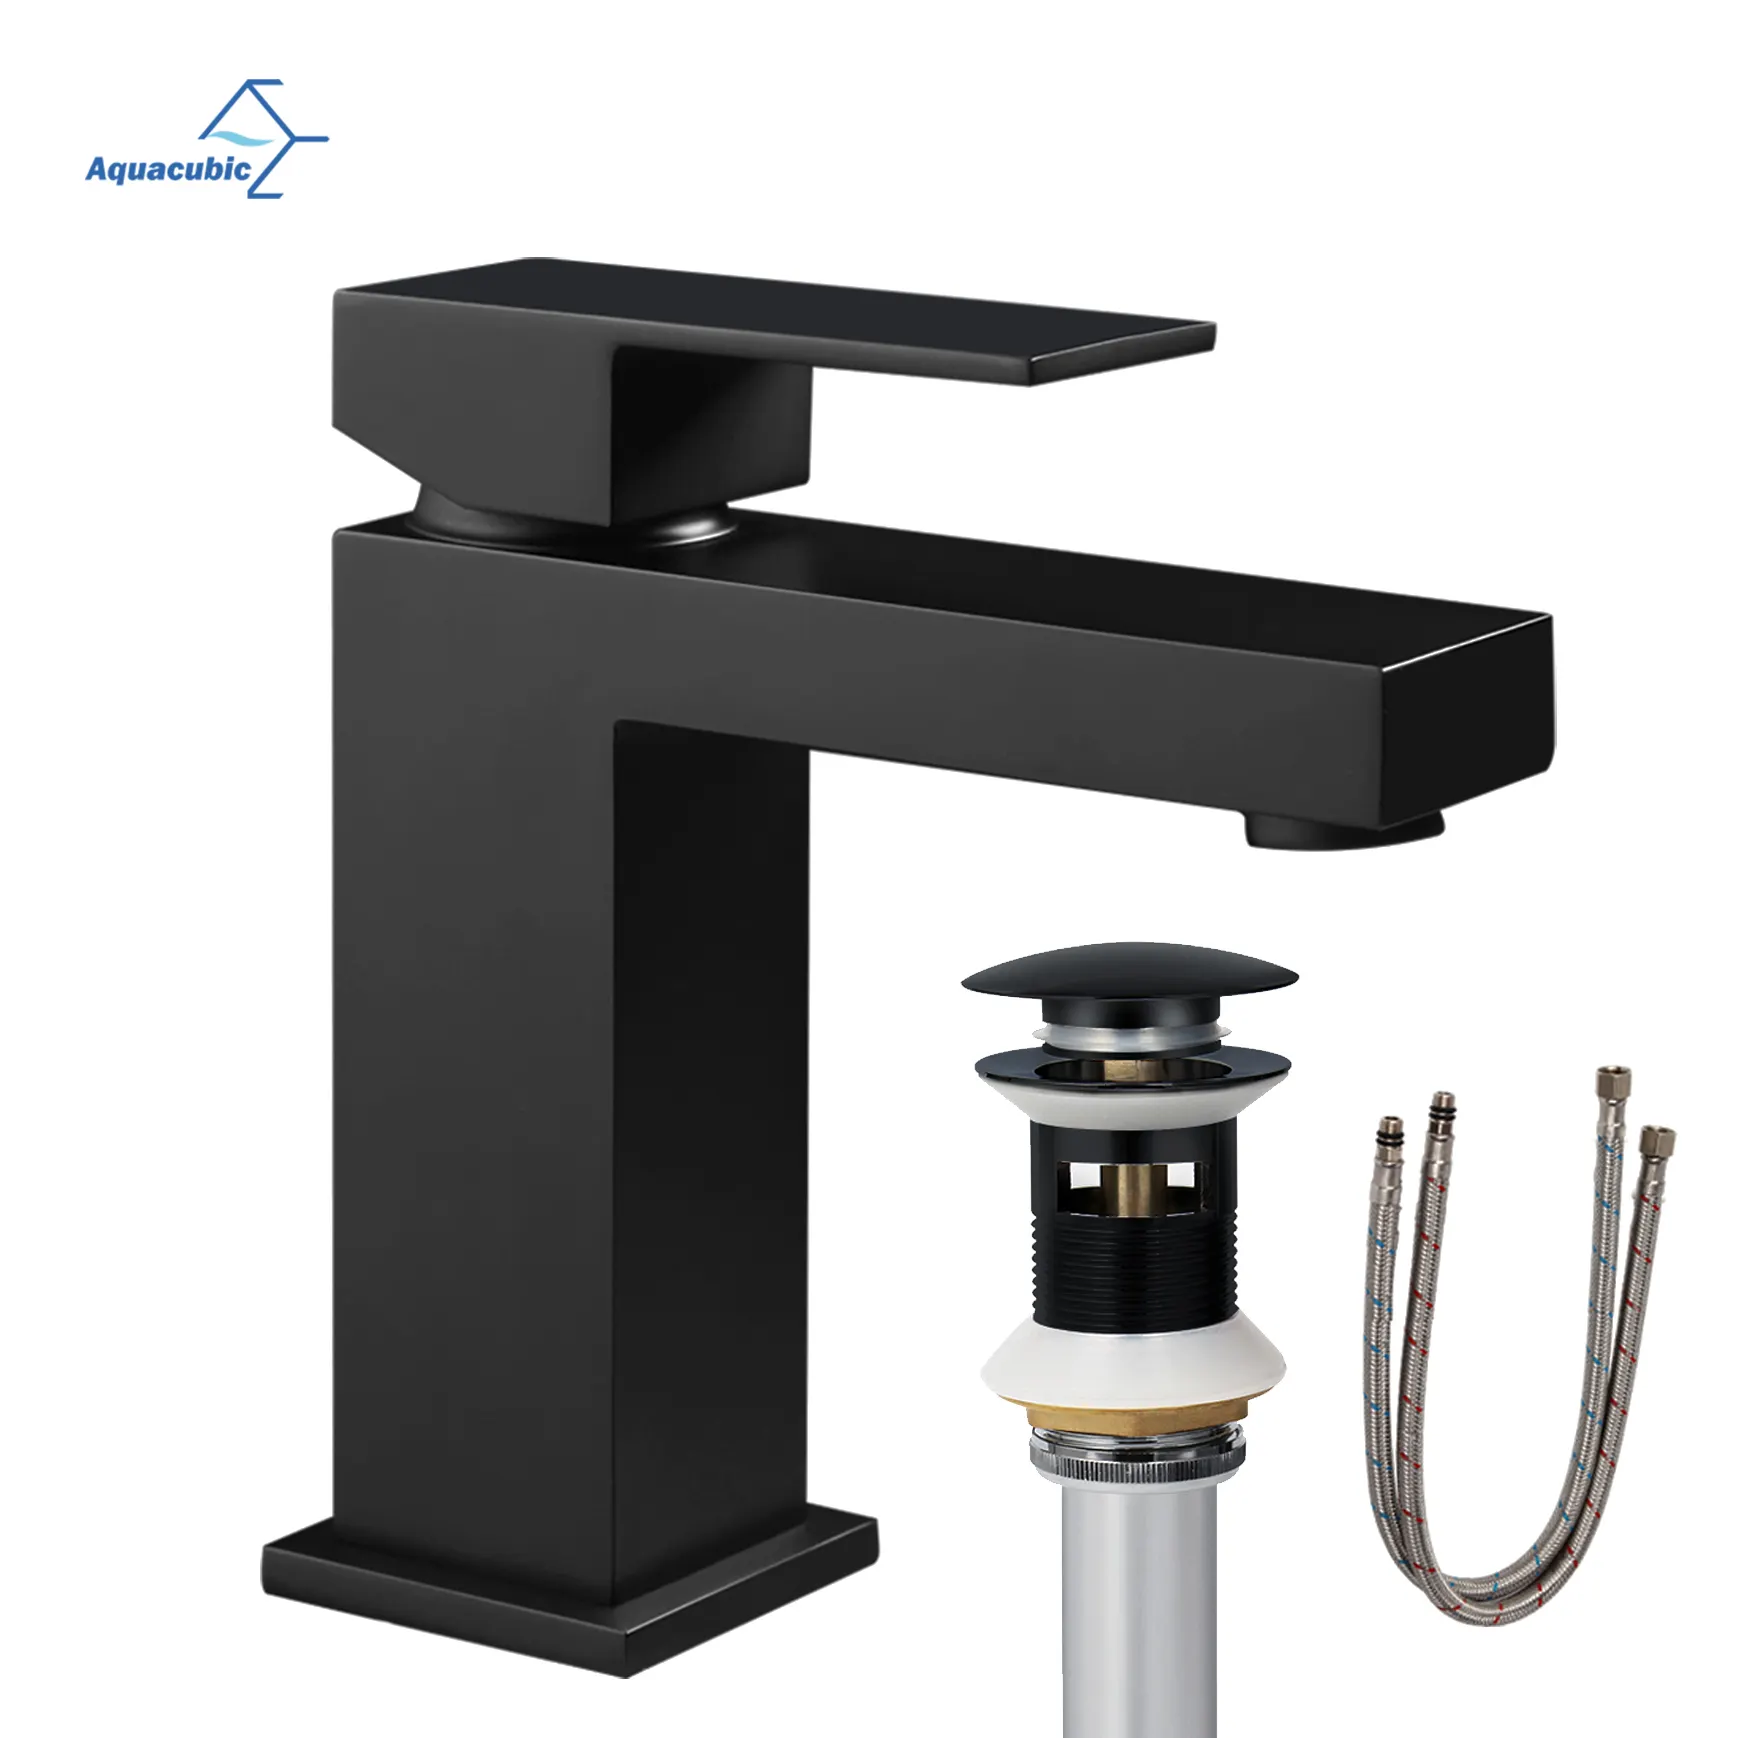 Black Bathroom Faucet Luxury Designed Bathroom Single Hole CUPC Brass Lavatory Black Basin Faucet Shipping From The United States